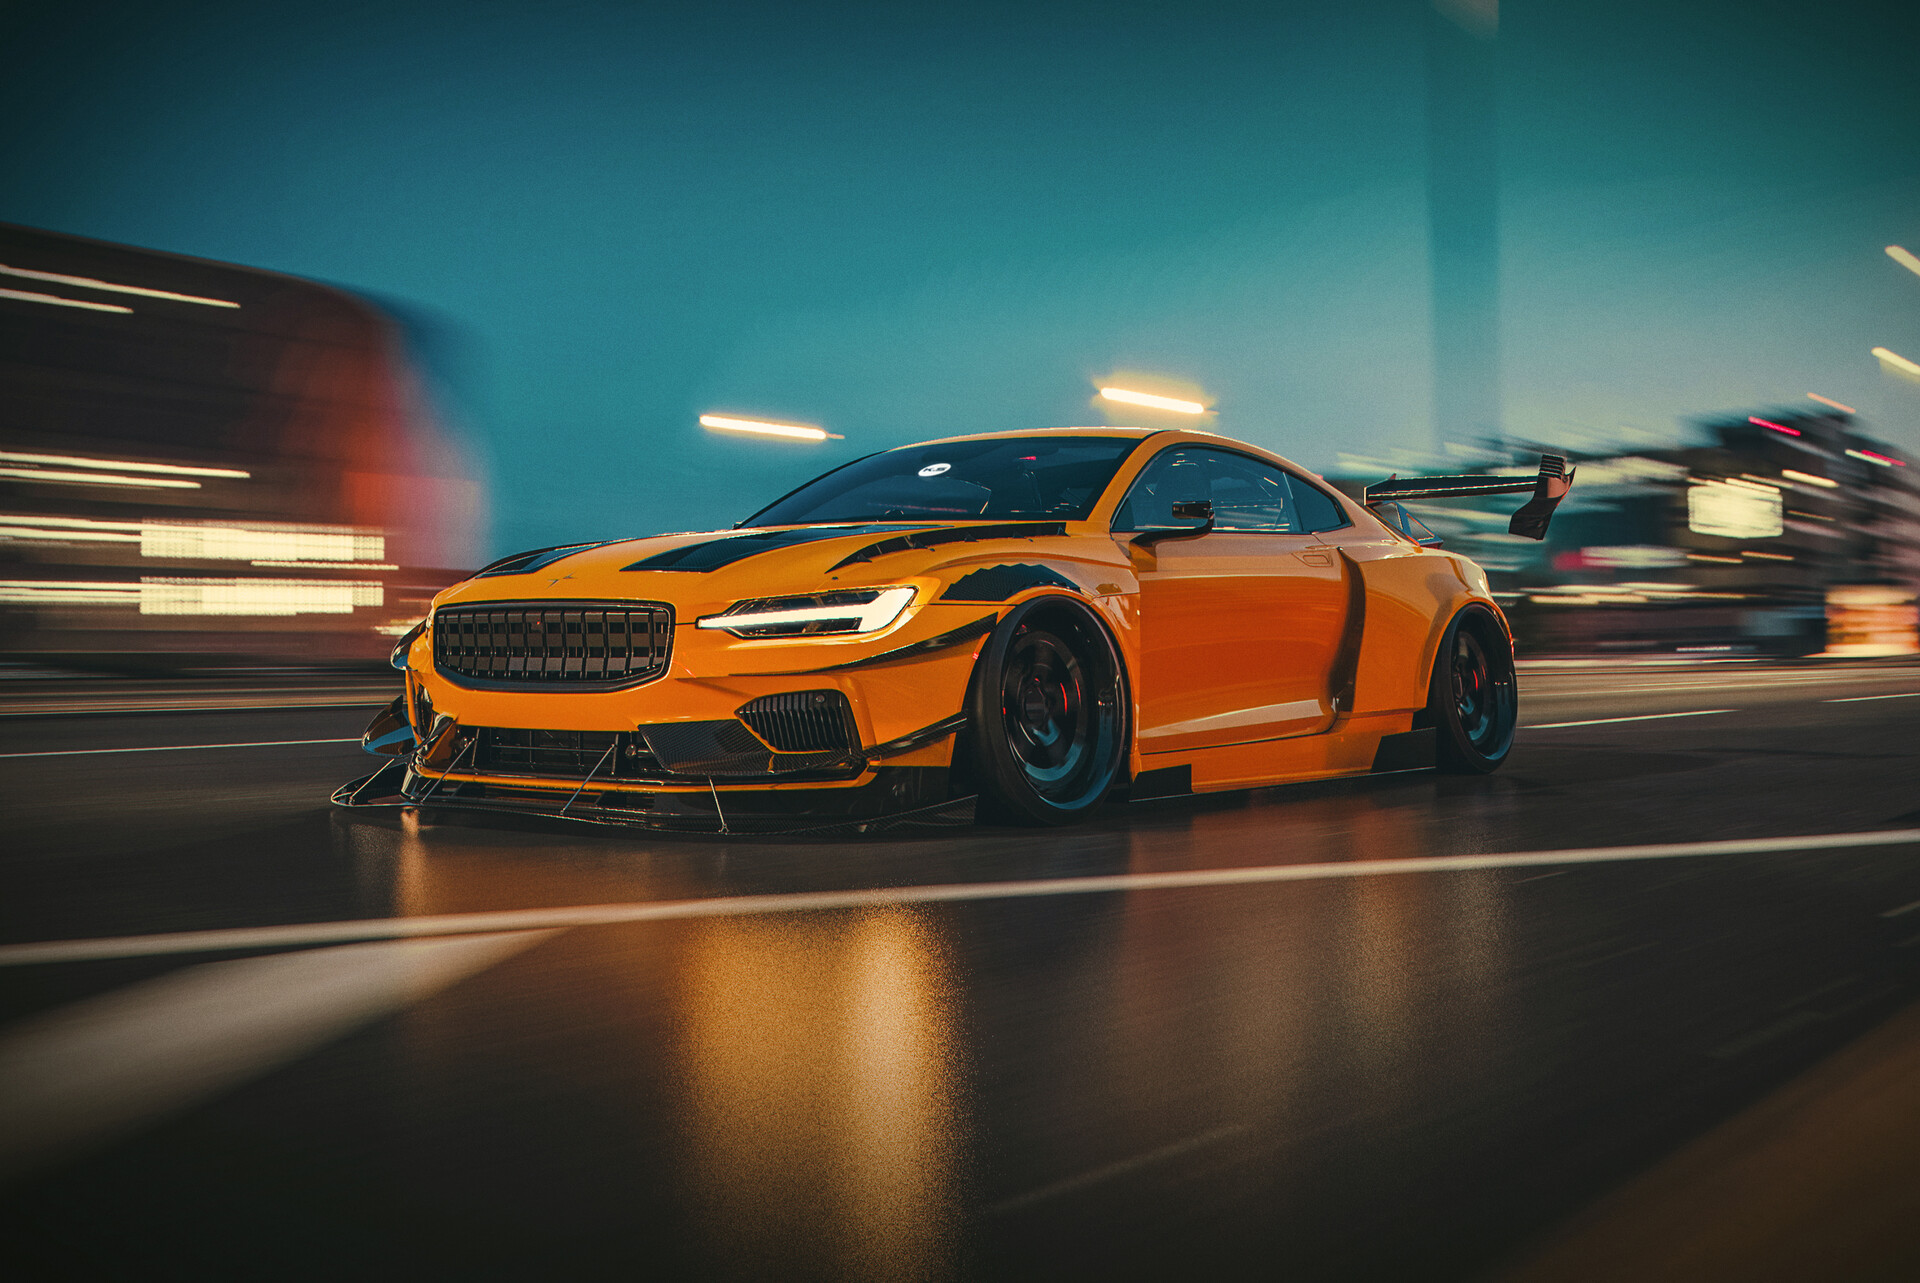 Need For Speed Heat's Hero Car Is A Turned-Up Polestar 1